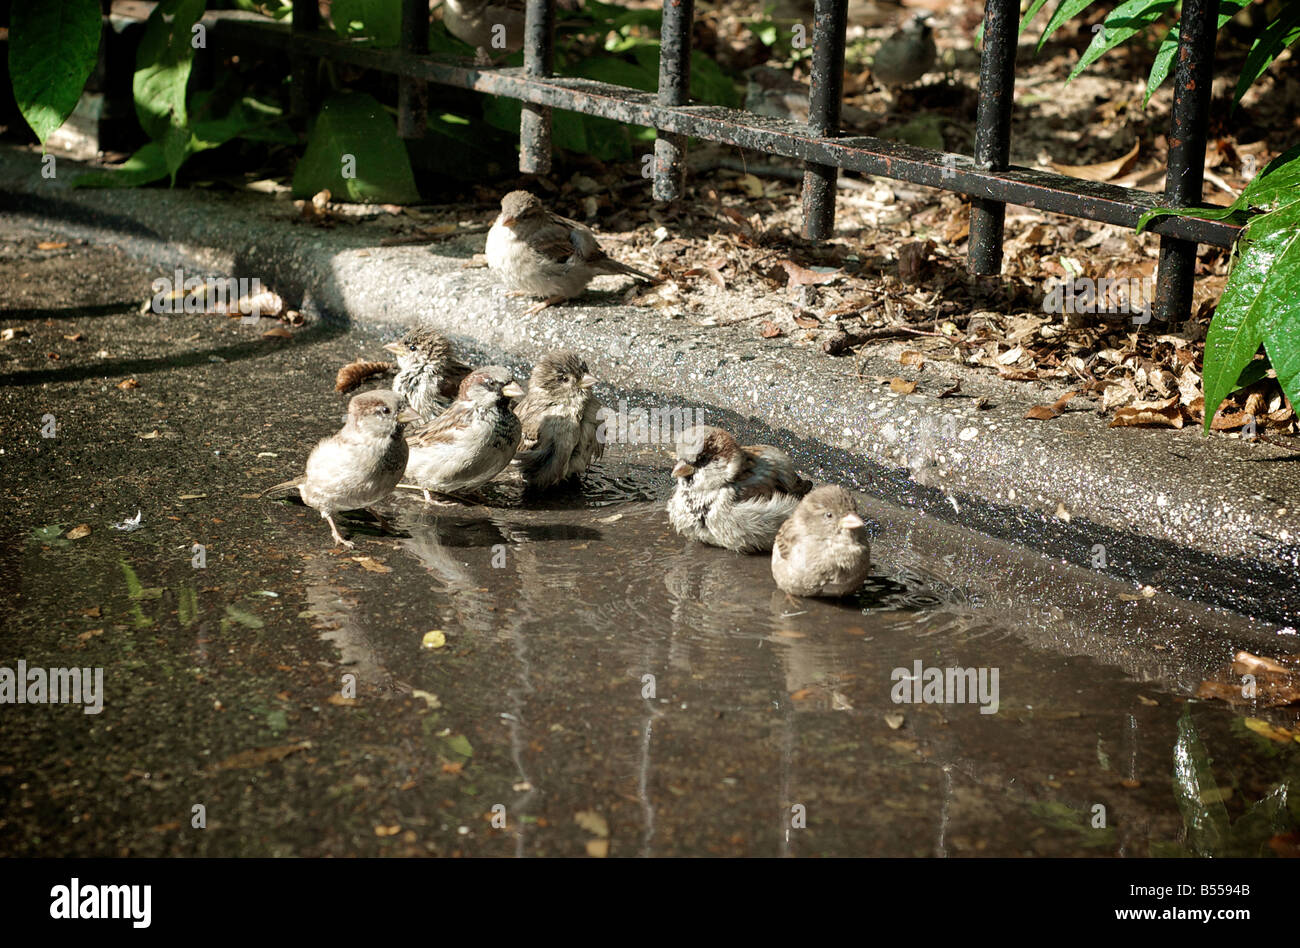 Many Birds Bathing in a Puddle in a Hot Summer Day in Brooklyn New York Stock Photo